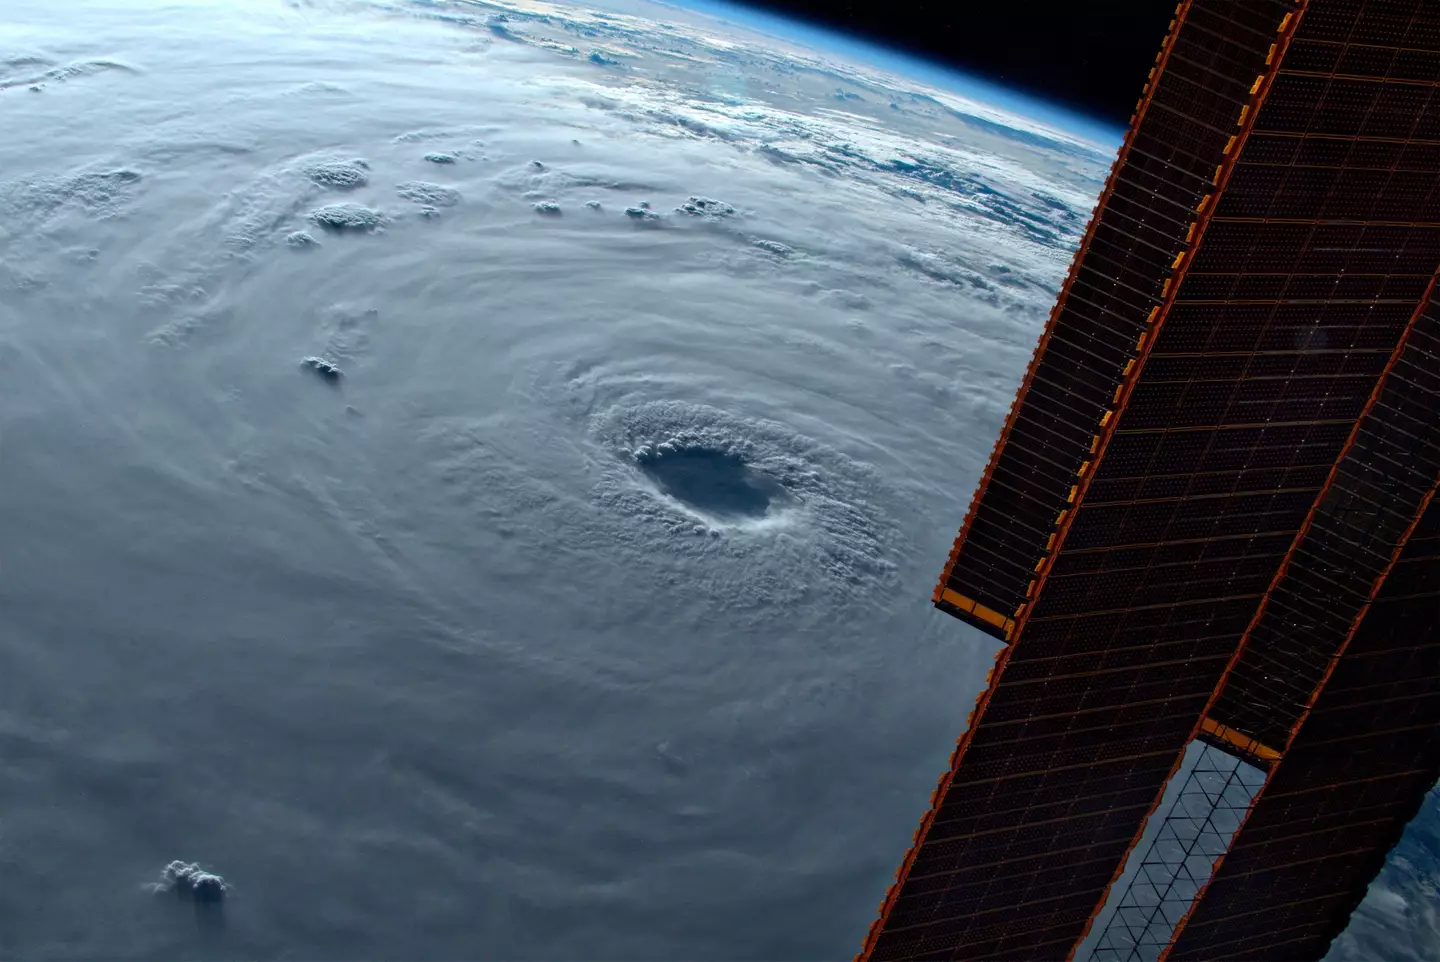 Typhoon Nanmadol, as seen from the International Space Station.